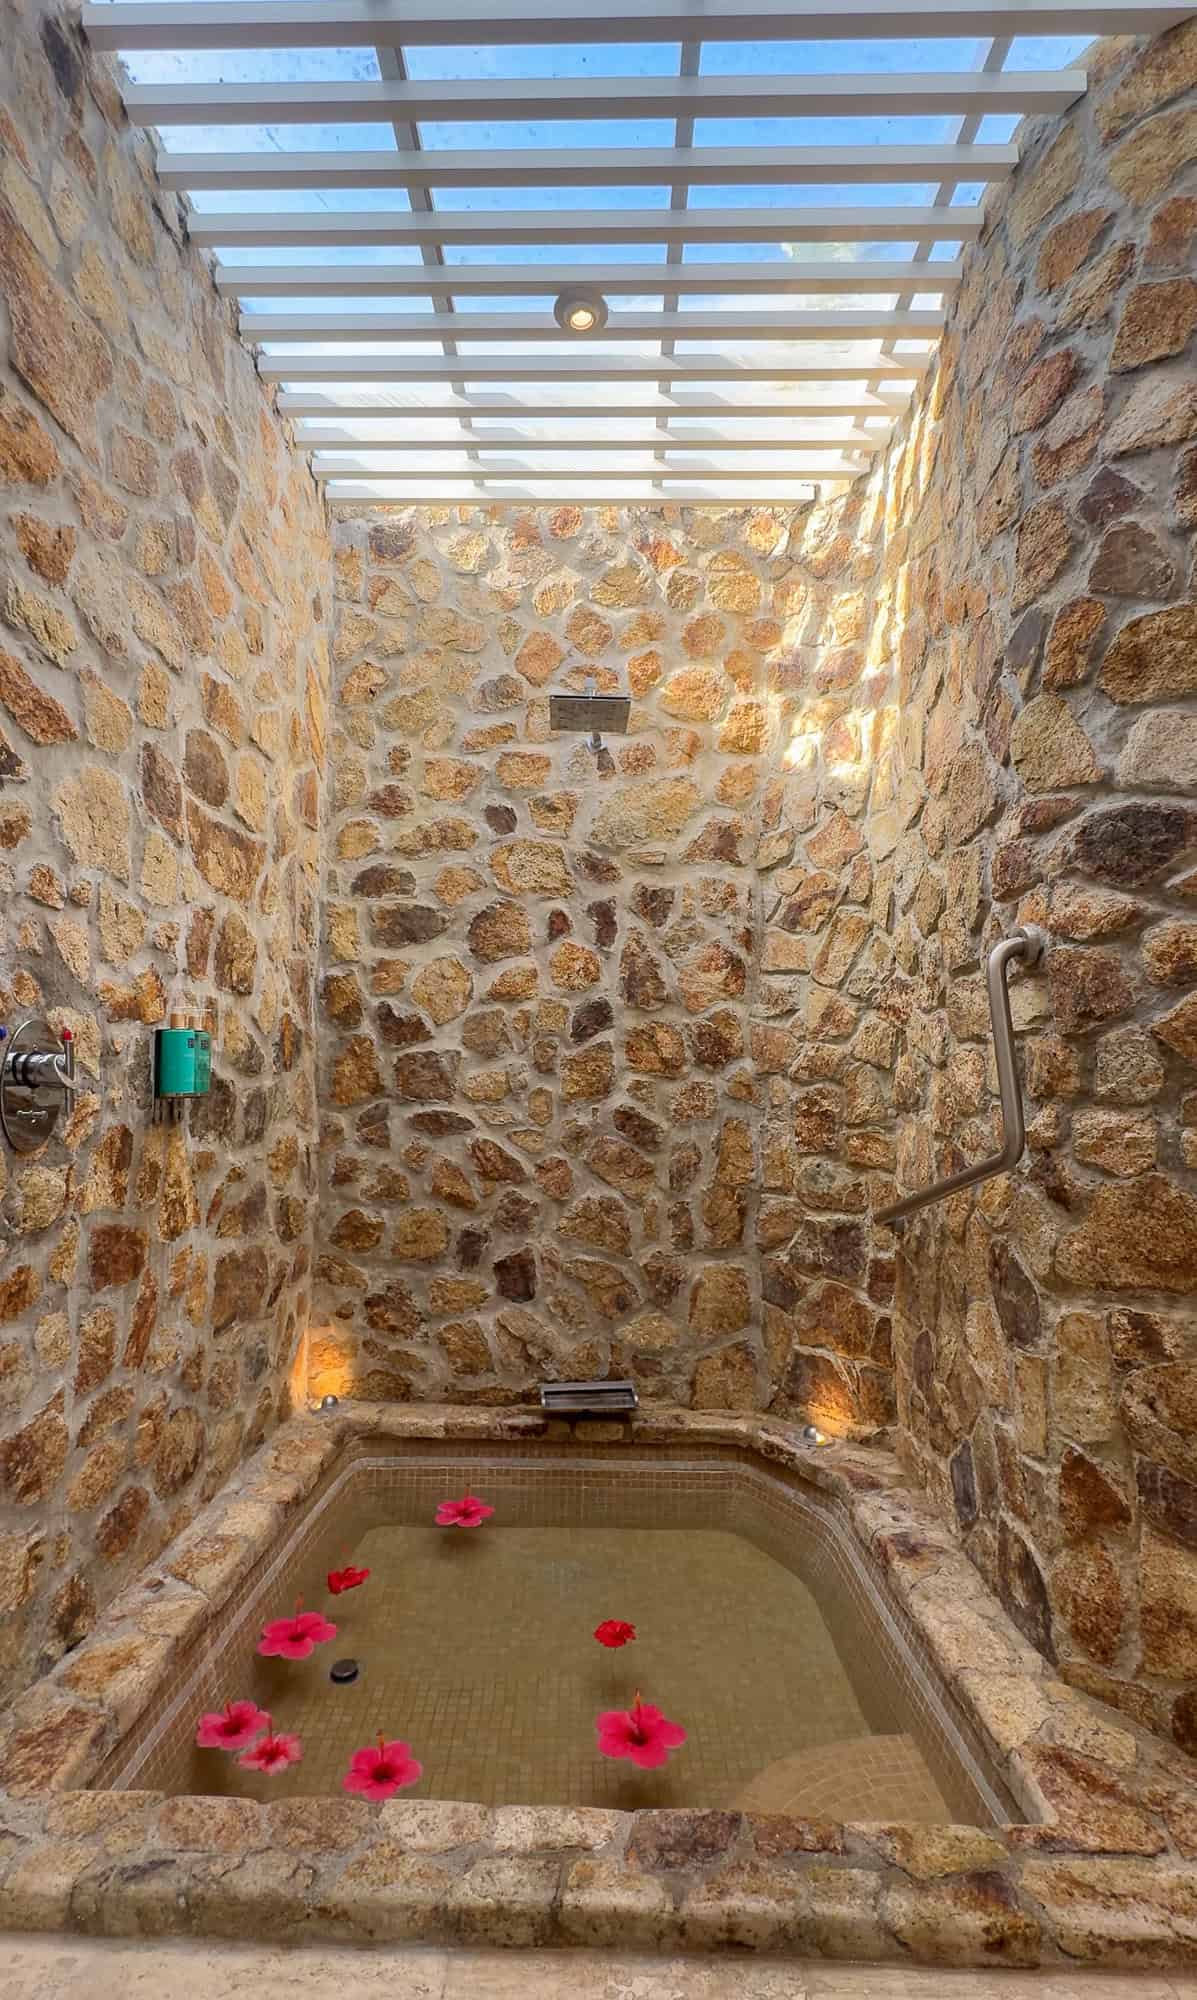 a stone shower with a bathtub and a handrail